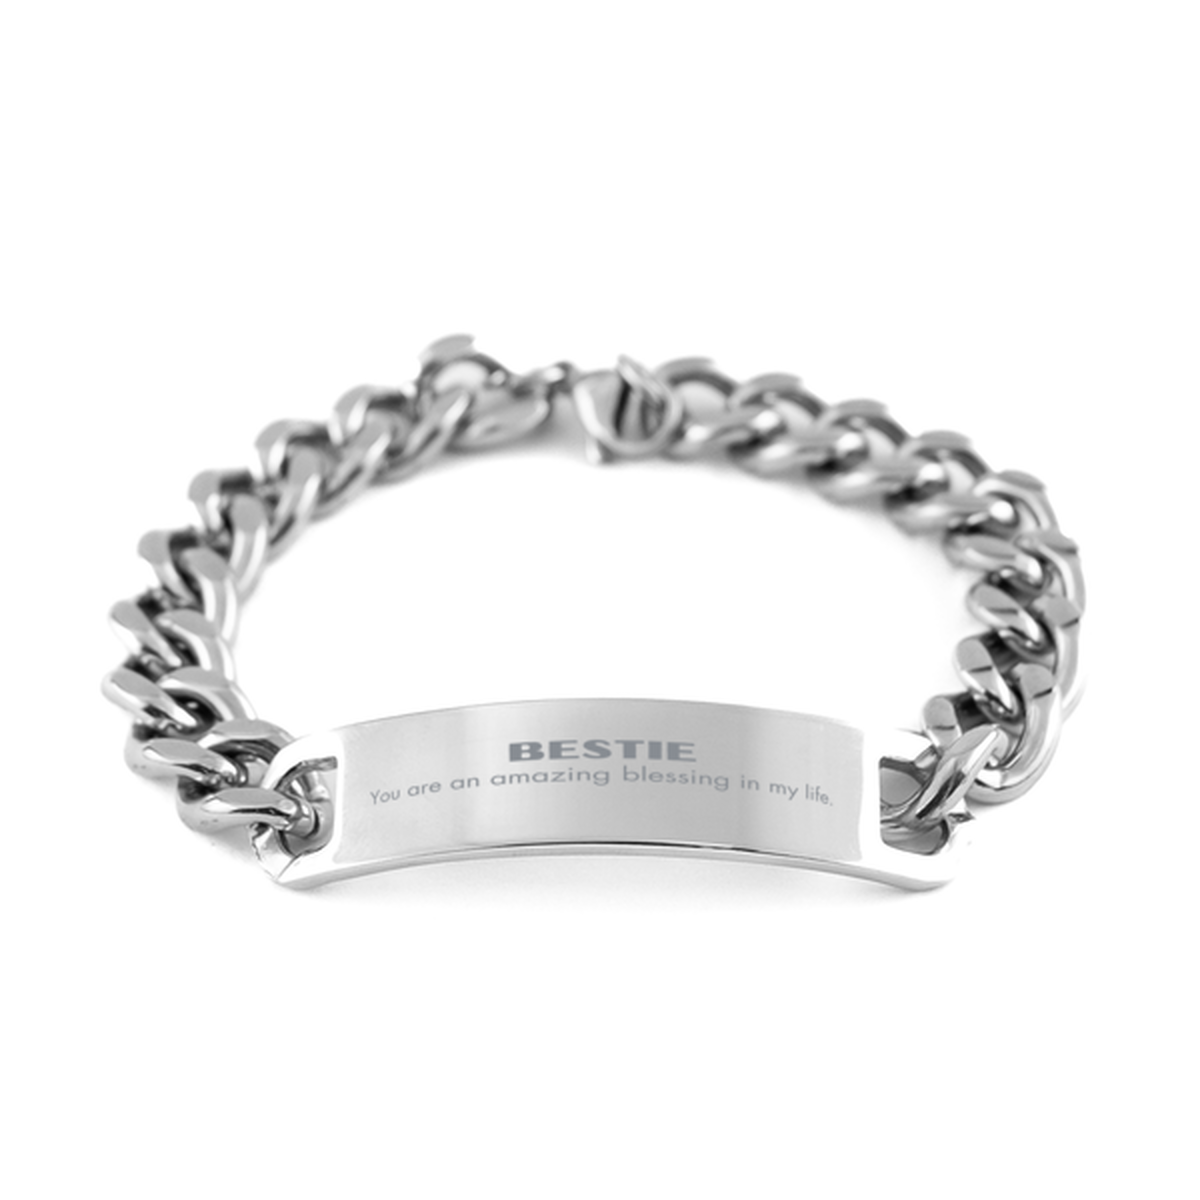 Bestie Cuban Chain Stainless Steel Bracelet, You are an amazing blessing in my life, Thank You Gifts For Bestie, Inspirational Birthday Christmas Unique Gifts For Bestie